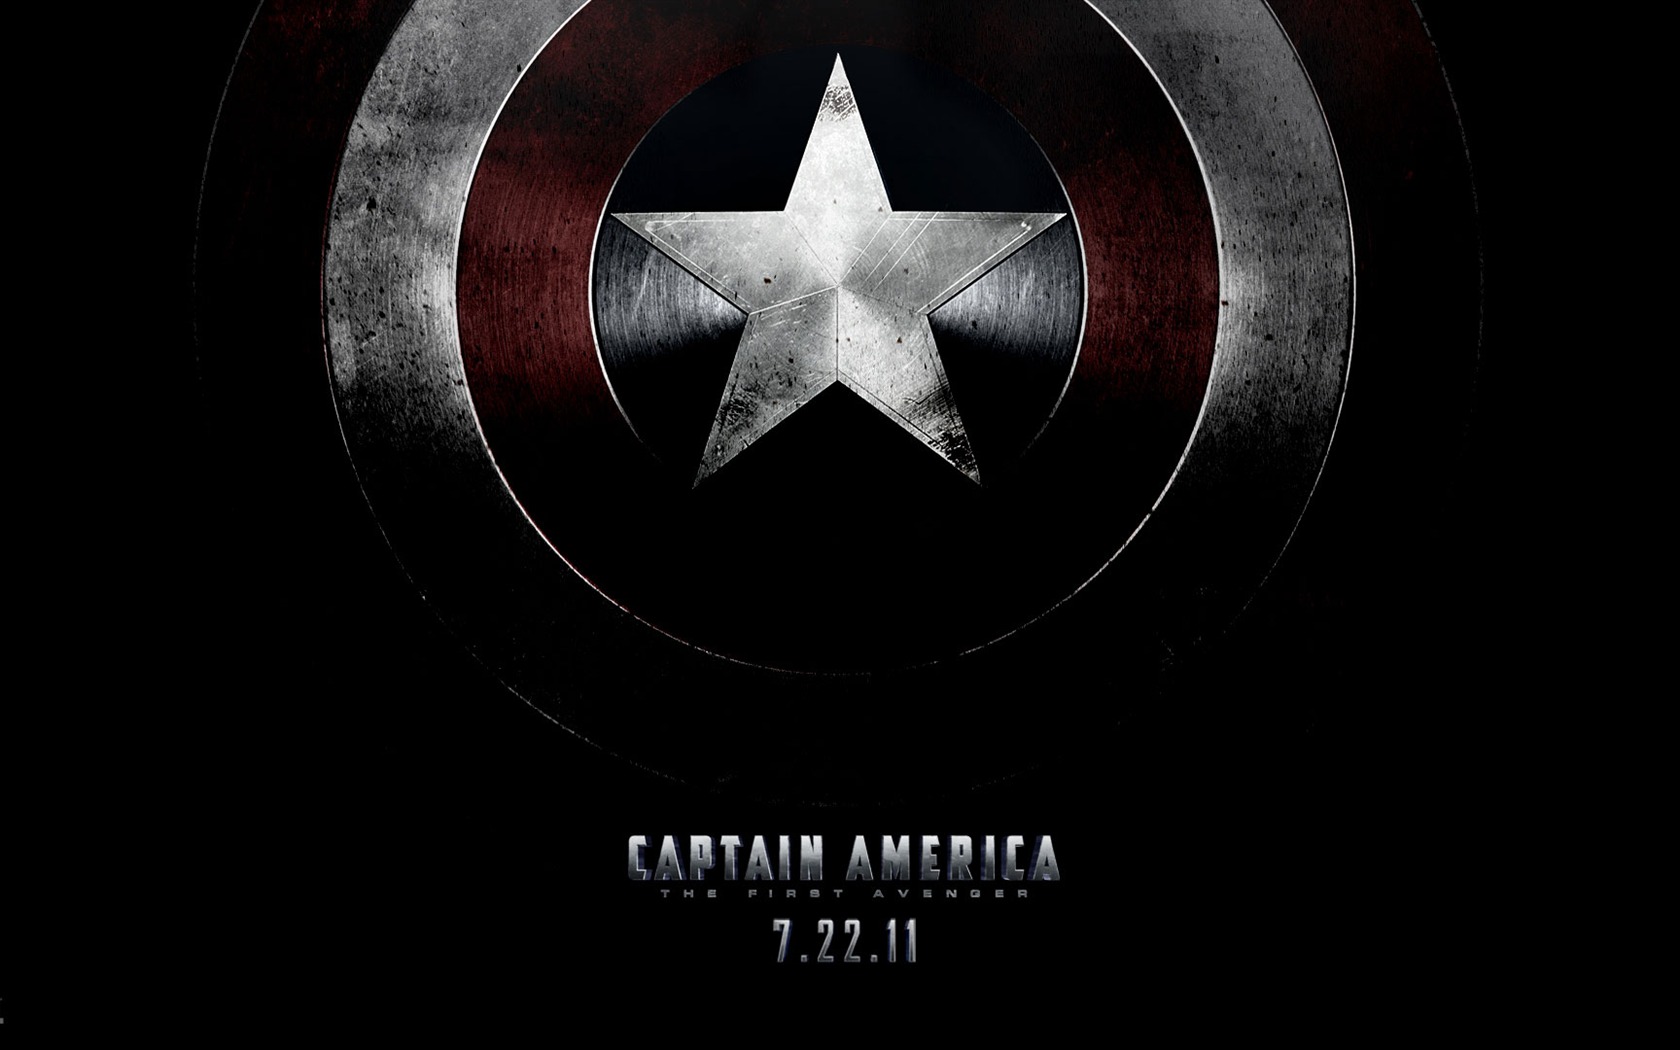 Captain America: The First Avenger wallpapers HD #10 - 1680x1050